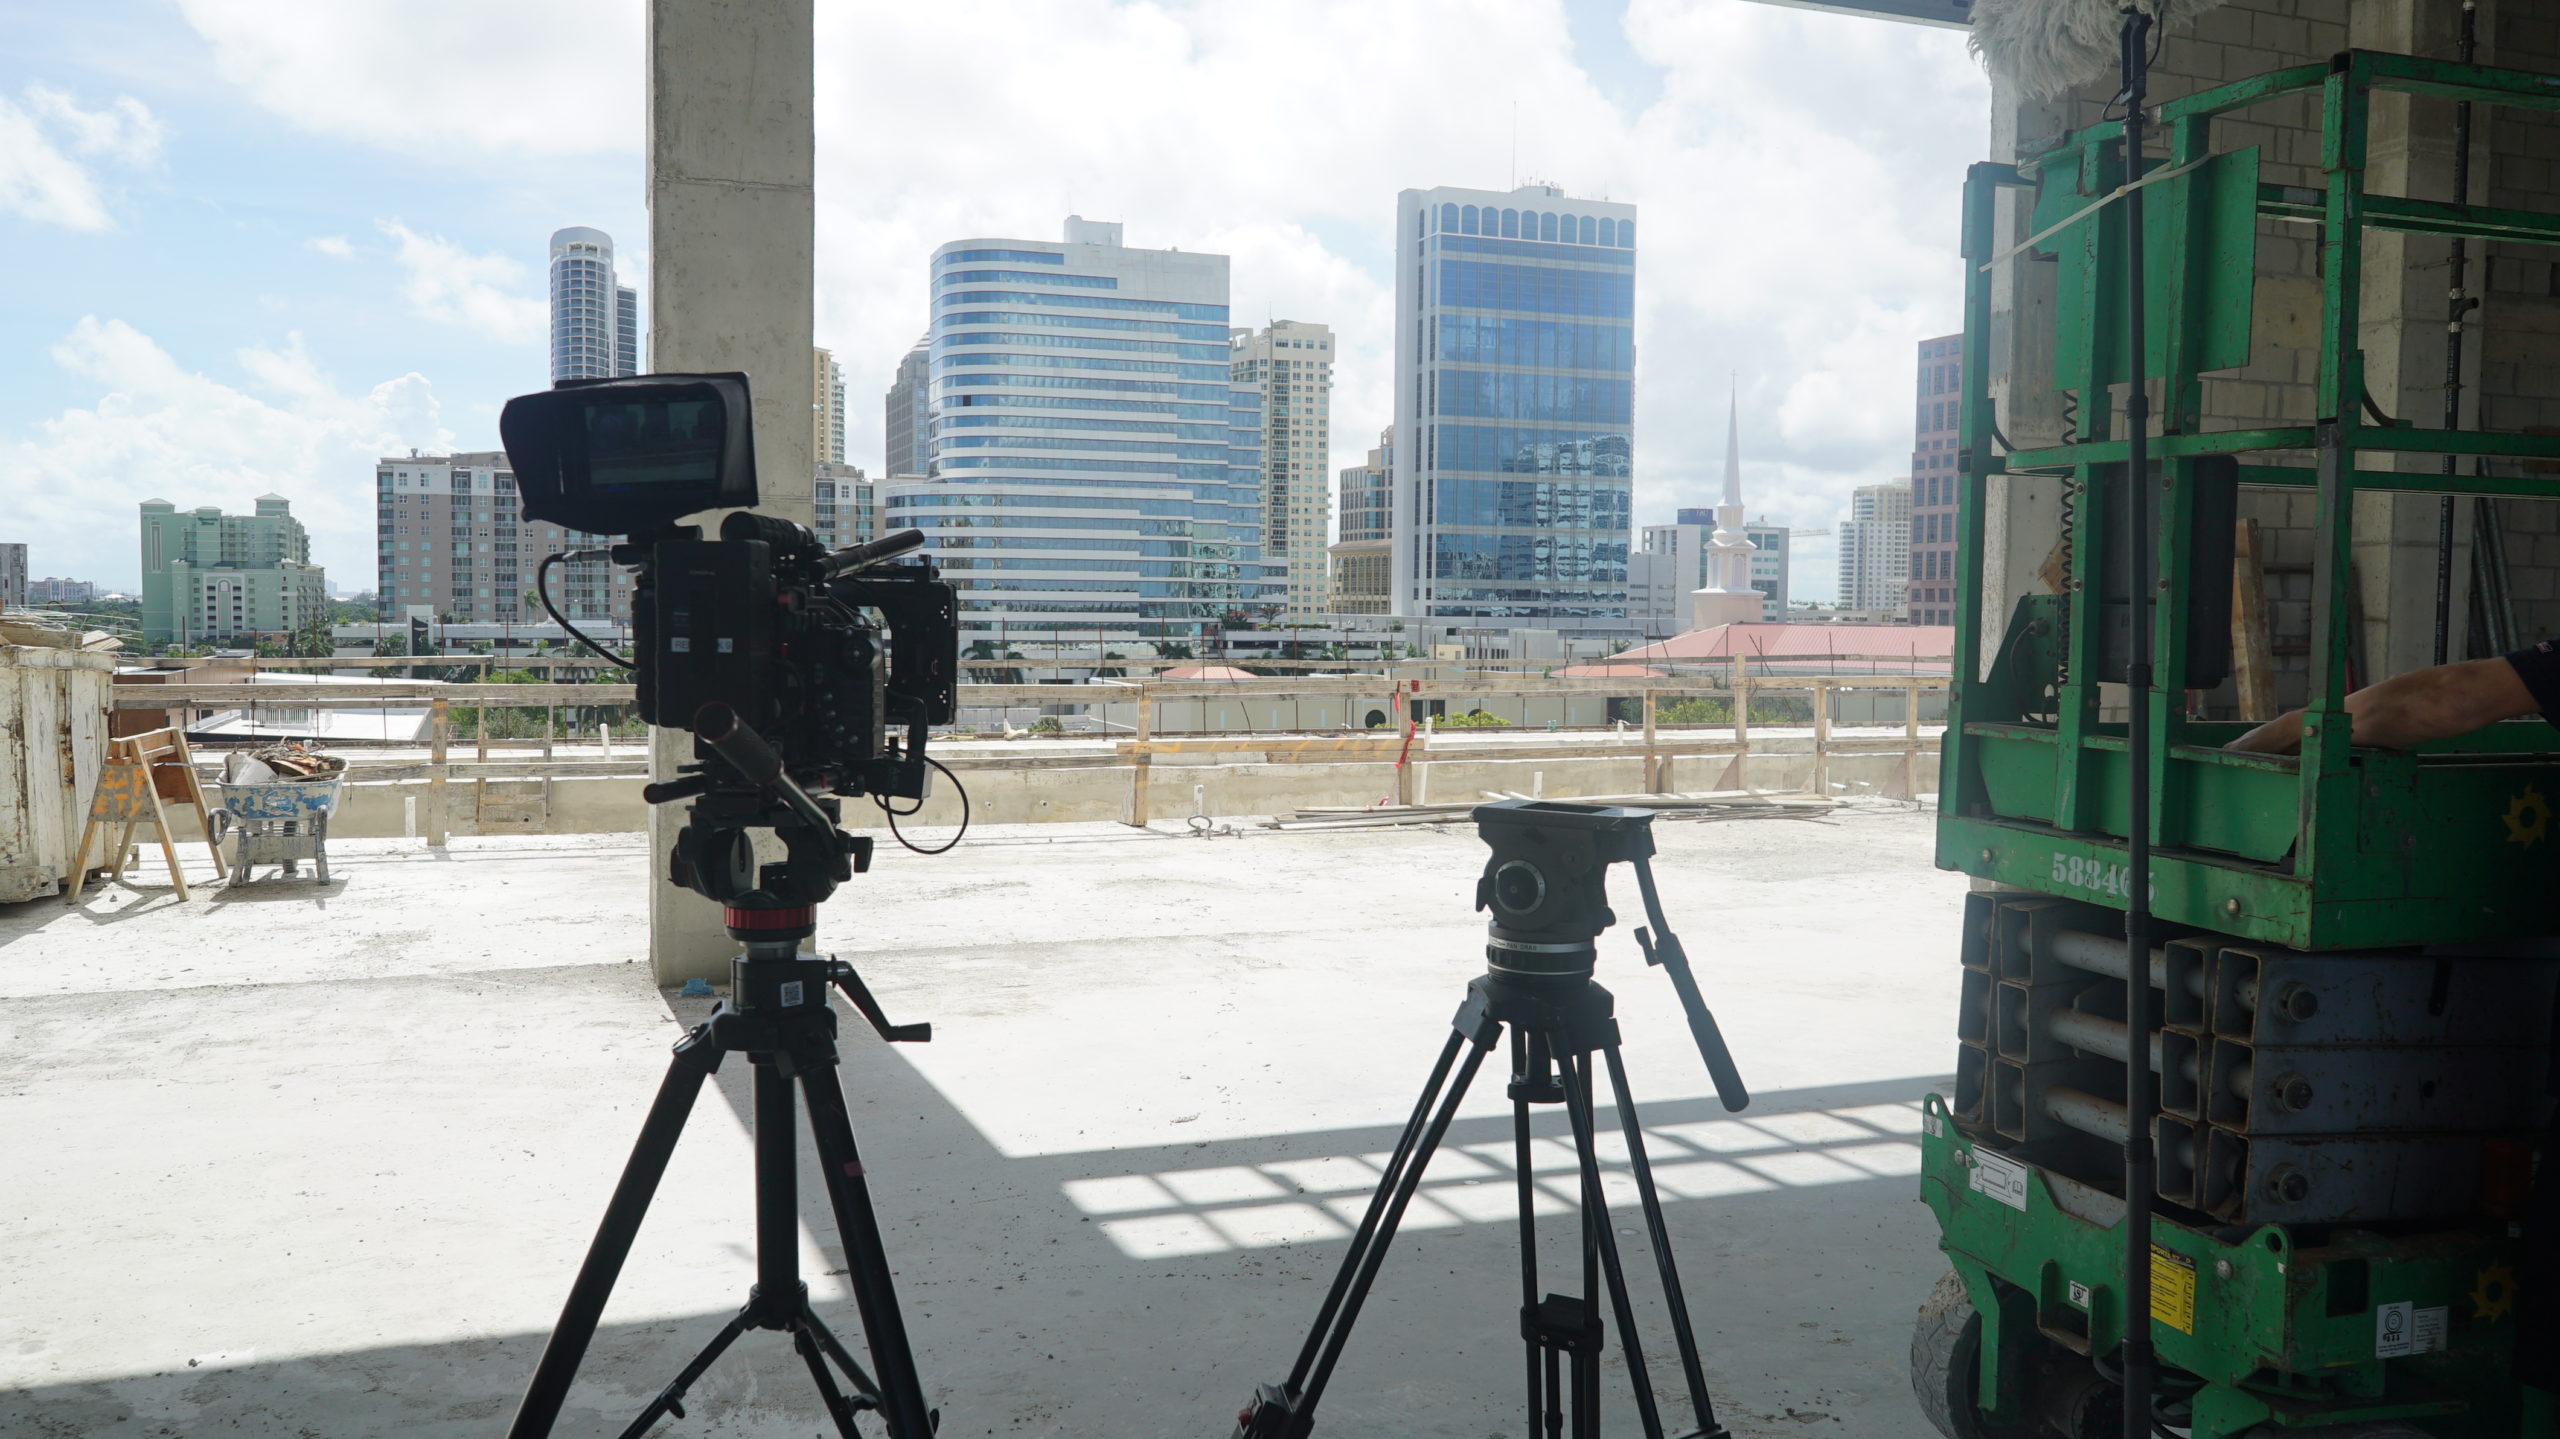 Camera equipment set up with city buildings in the background